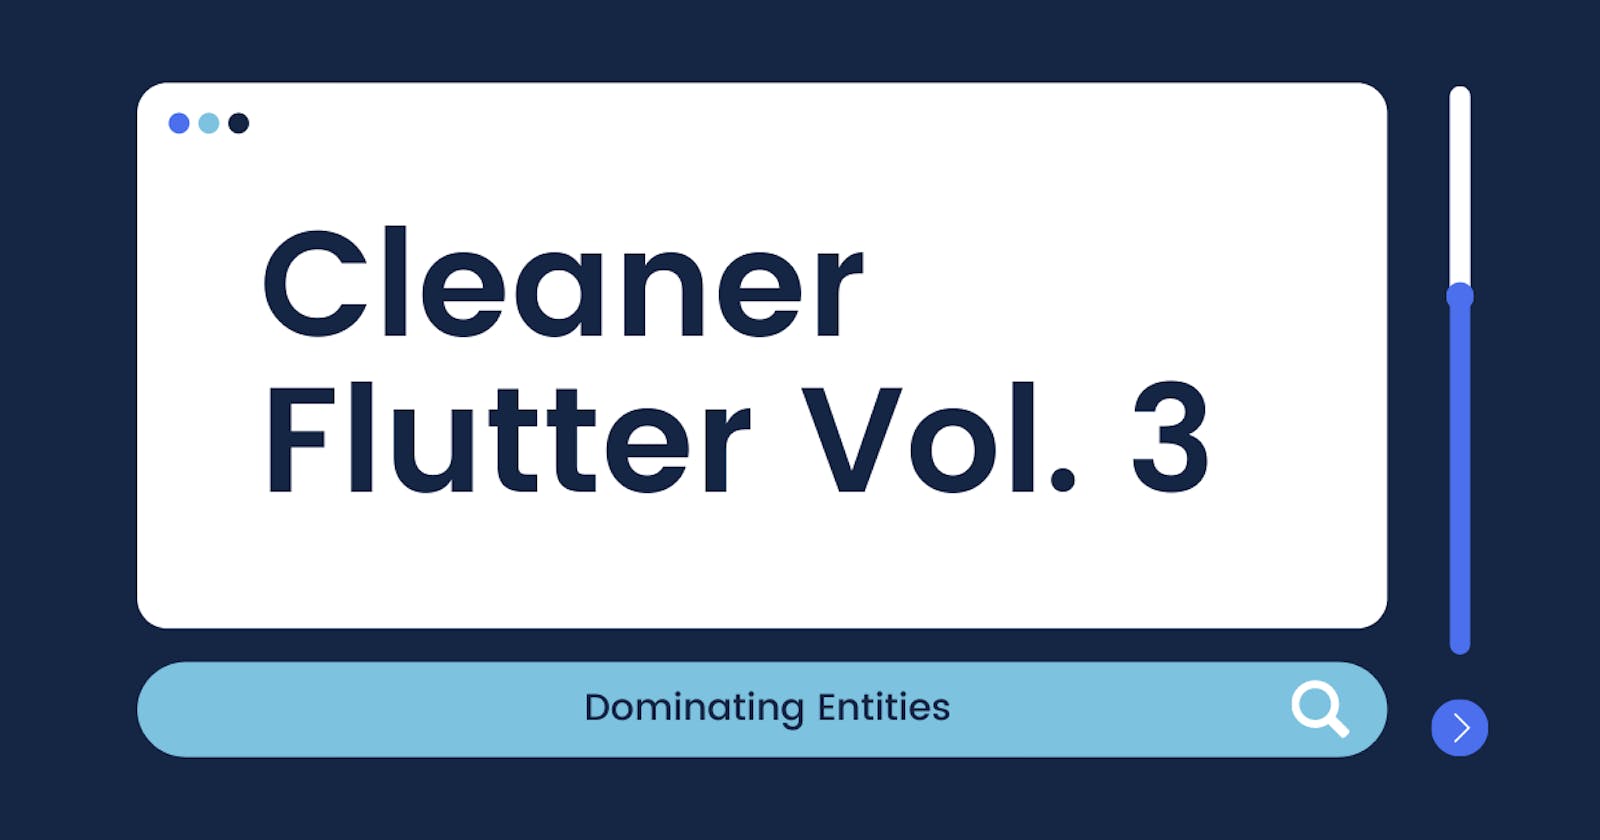 Cleaner Flutter Vol. 3: Dominating entities